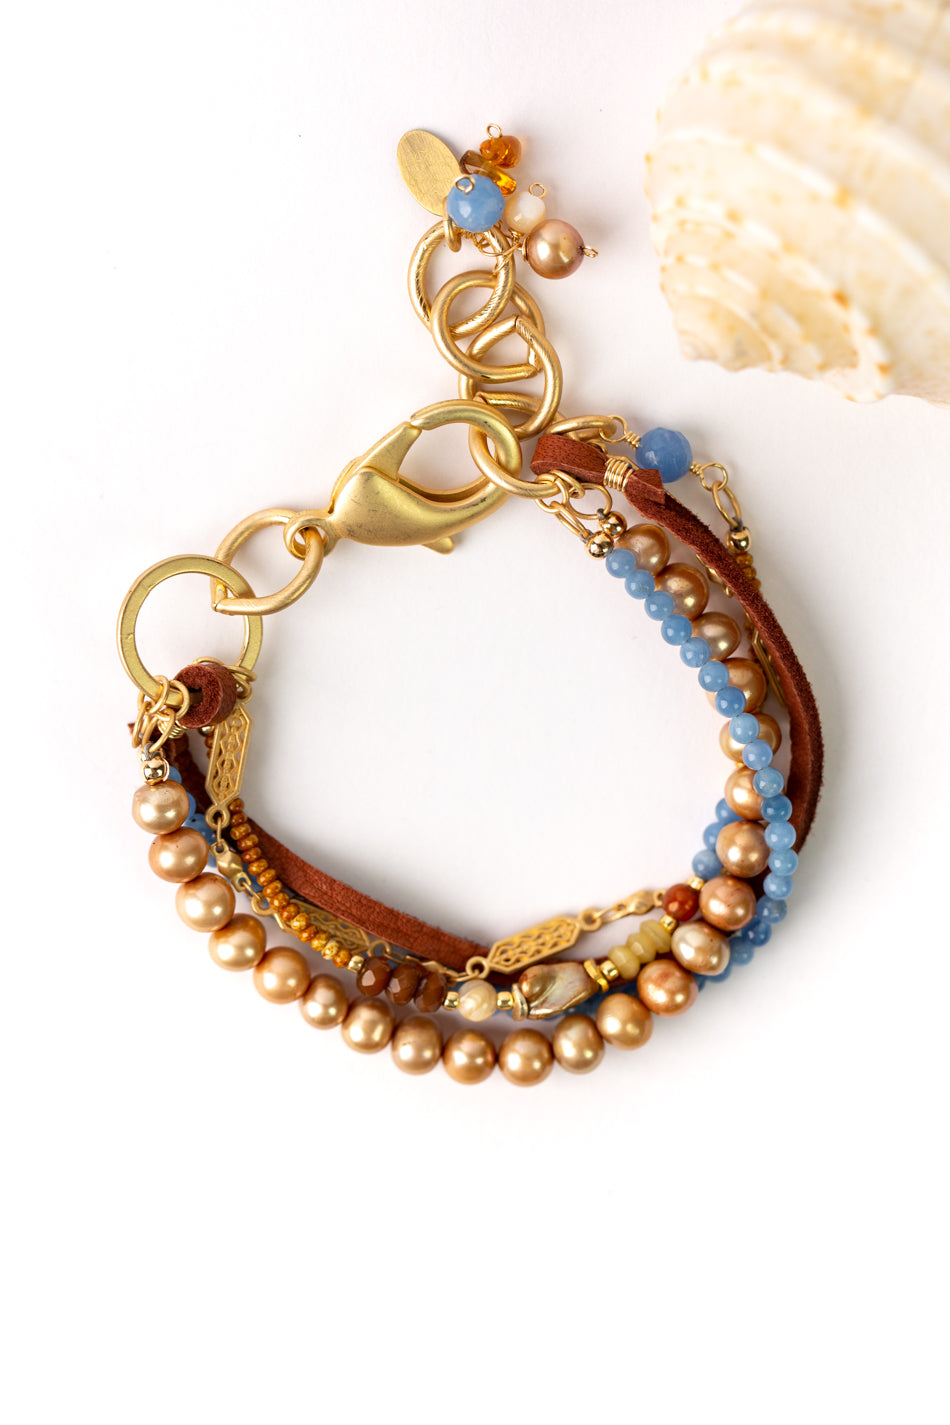 Sand and Sea 7.75-9" Leather, Cat's Eye, Fresh Water Pearl Multistrand Bracelet